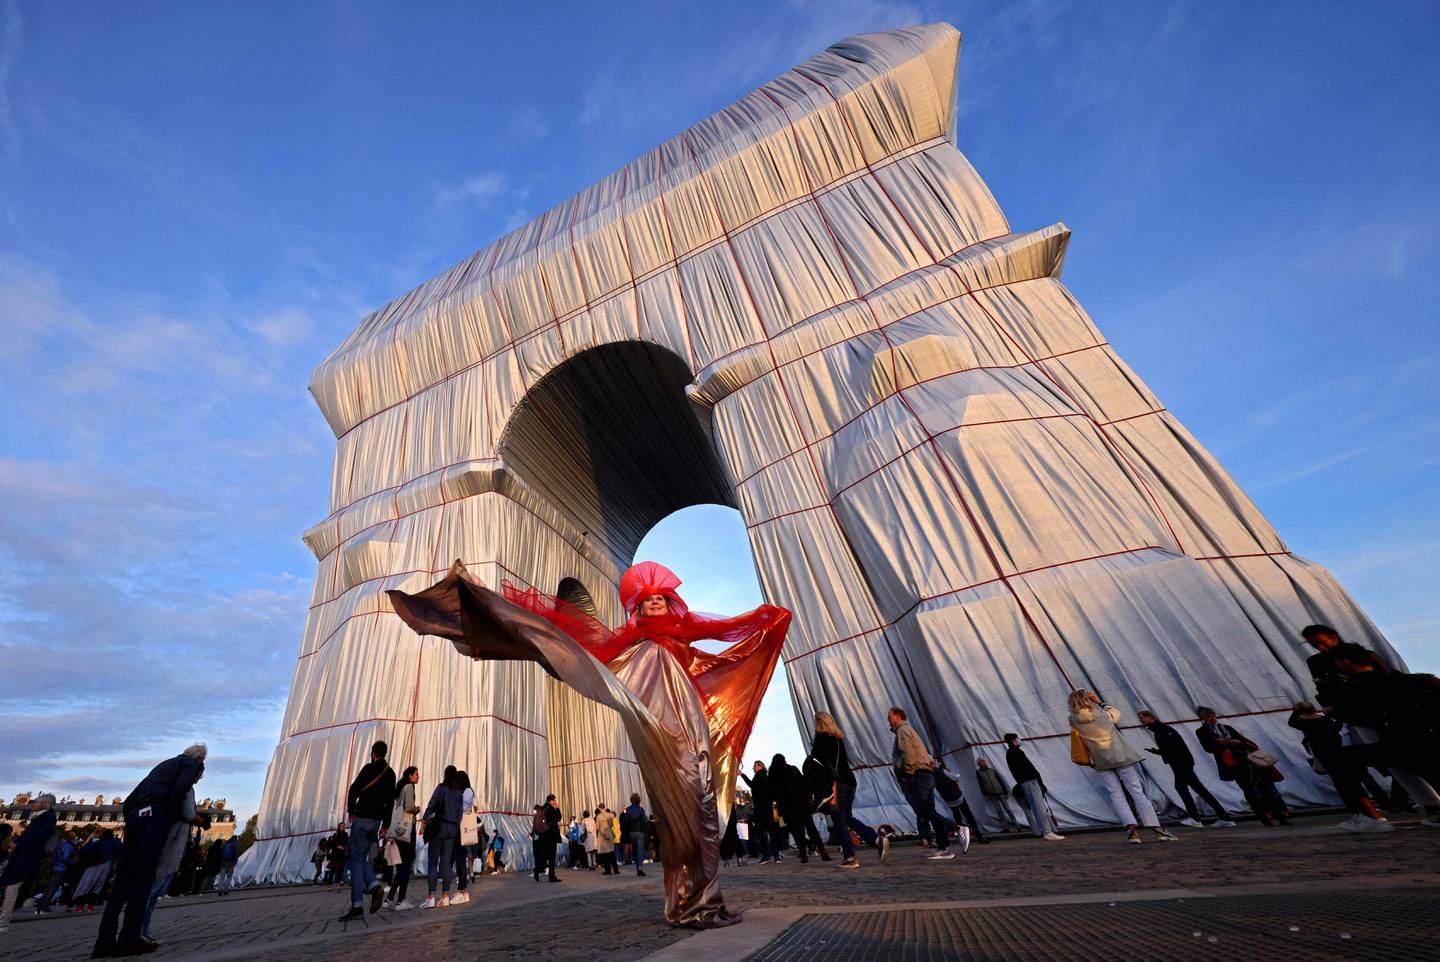 'L’Arc de Triomphe, Wrapped' seen in silver-blue fabric, as it was designed by late artist Christo. AFP